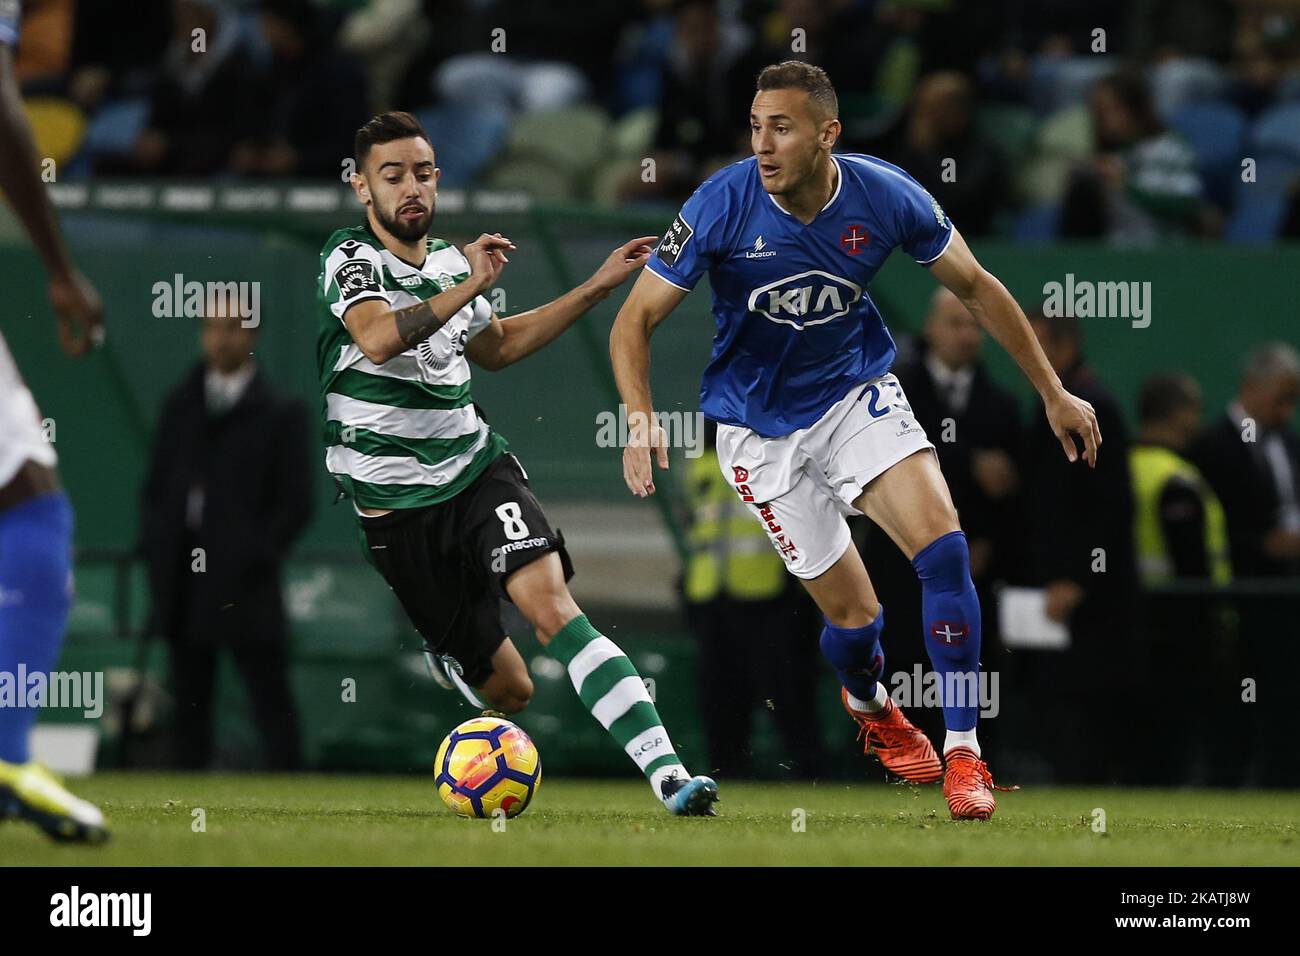 Sporting's midfielder Bruno Fernandes (L) vies for the ball with Belenenses's midfielder Hassan Yebda (R) during Primeira Liga 2017/18 match between Sporting CP vs CF Belenenses, in Lisbon, on December 1, 2017. (Photo by Carlos Palma/NurPhoto) Stock Photo